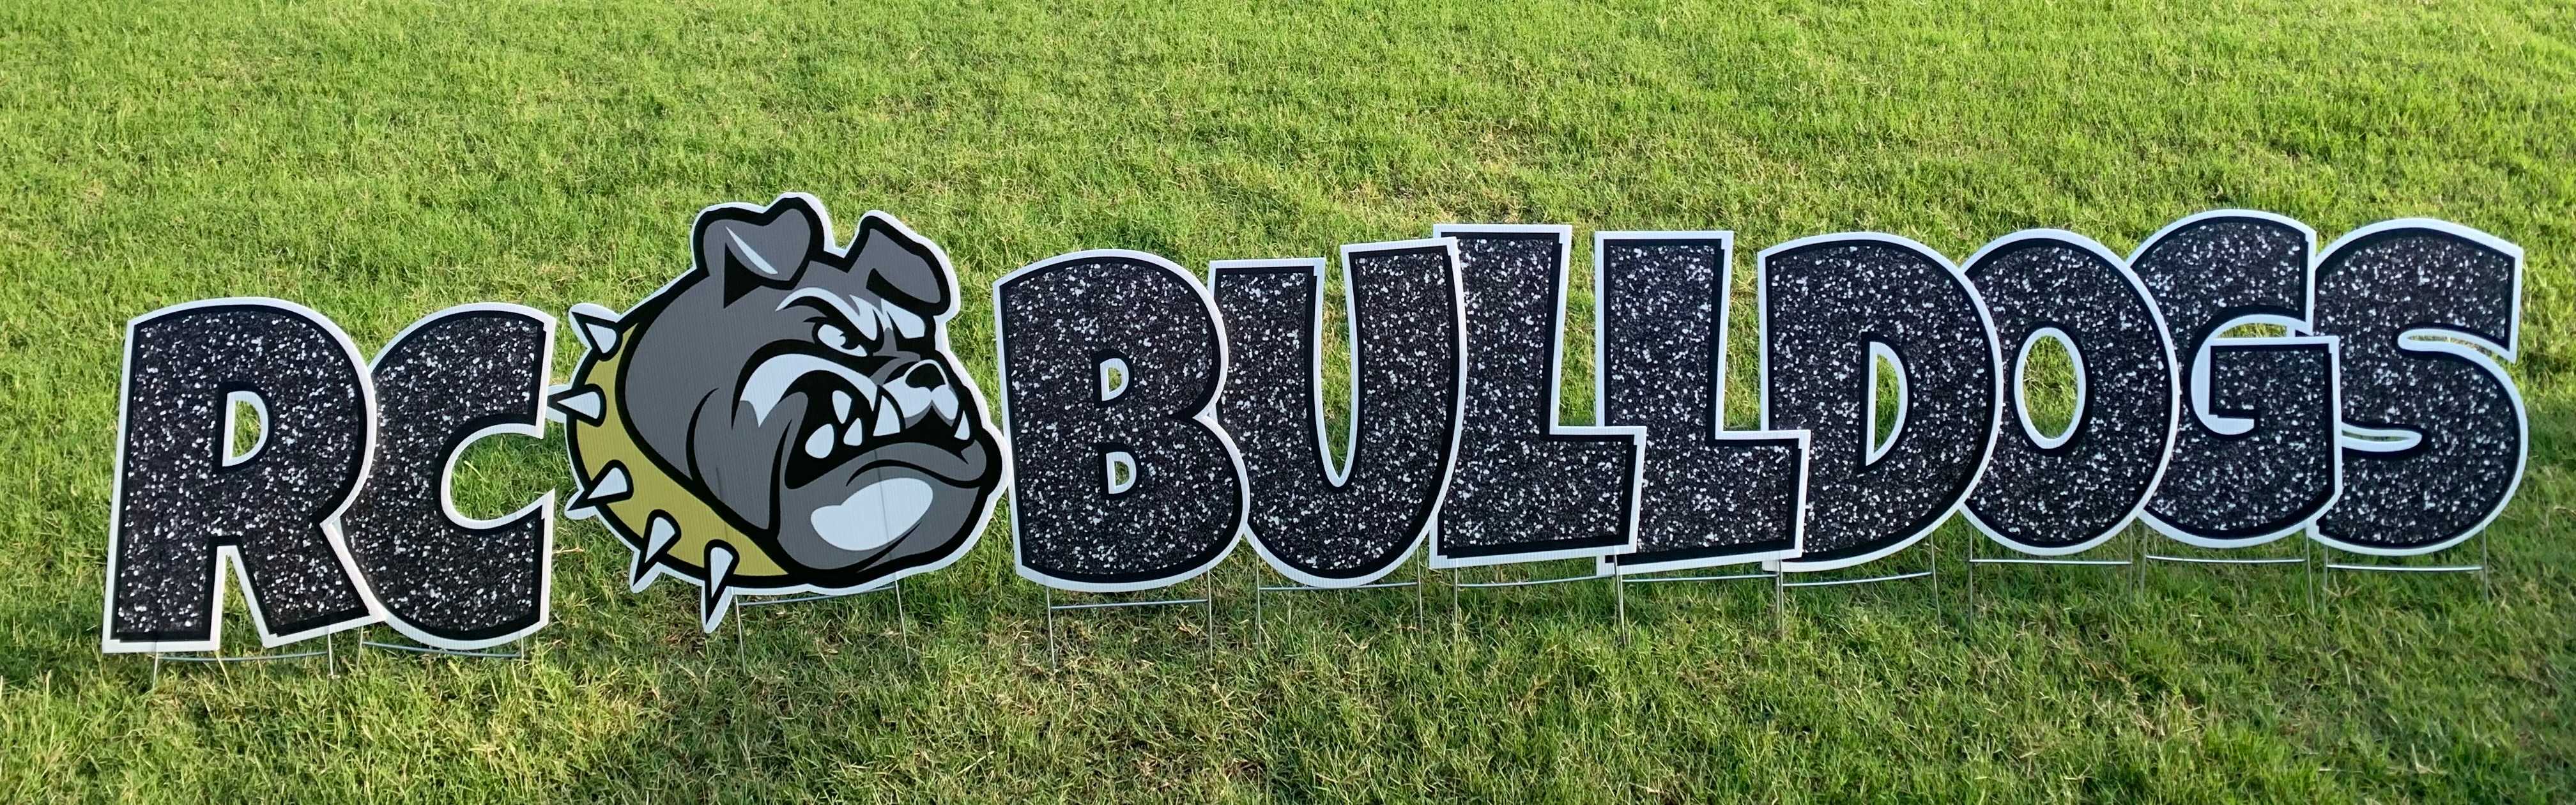 Yard card sign collection rc bulldogs 